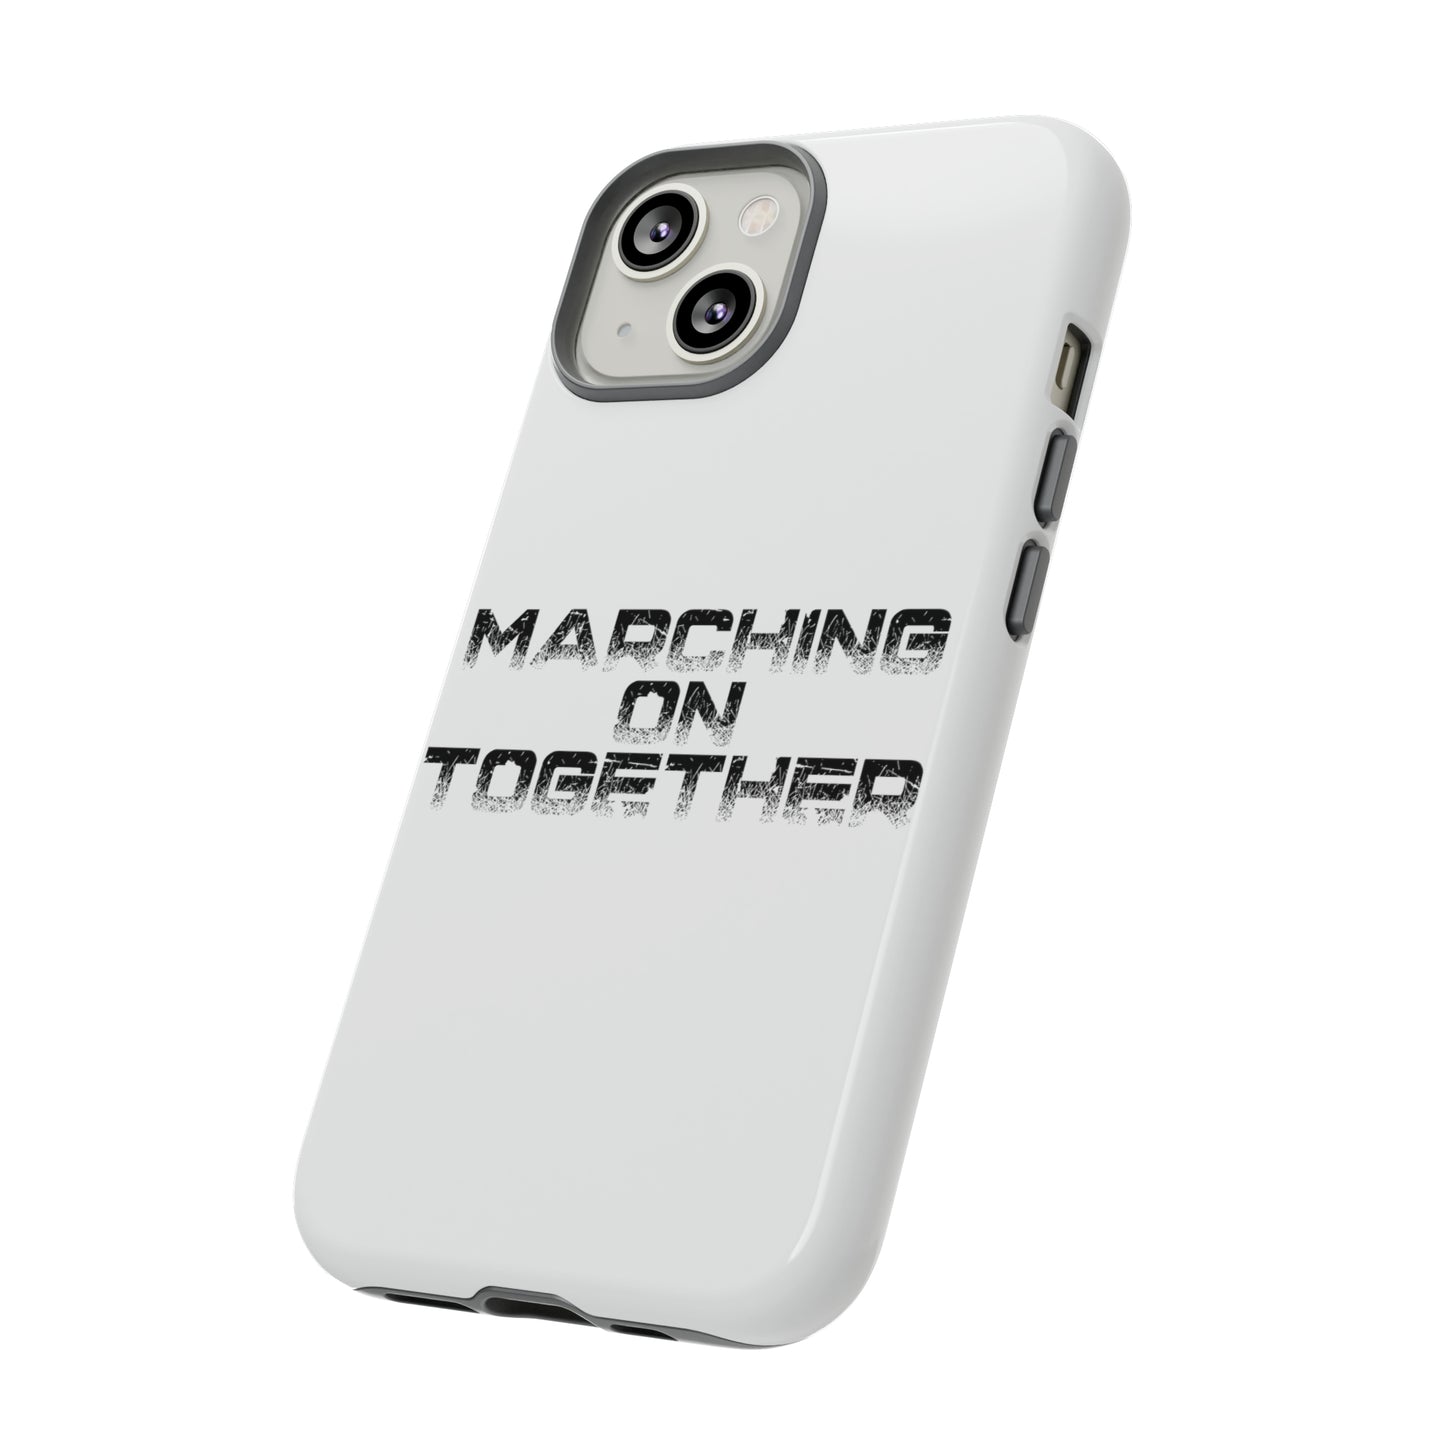 Marching On Together Tough Phone Case